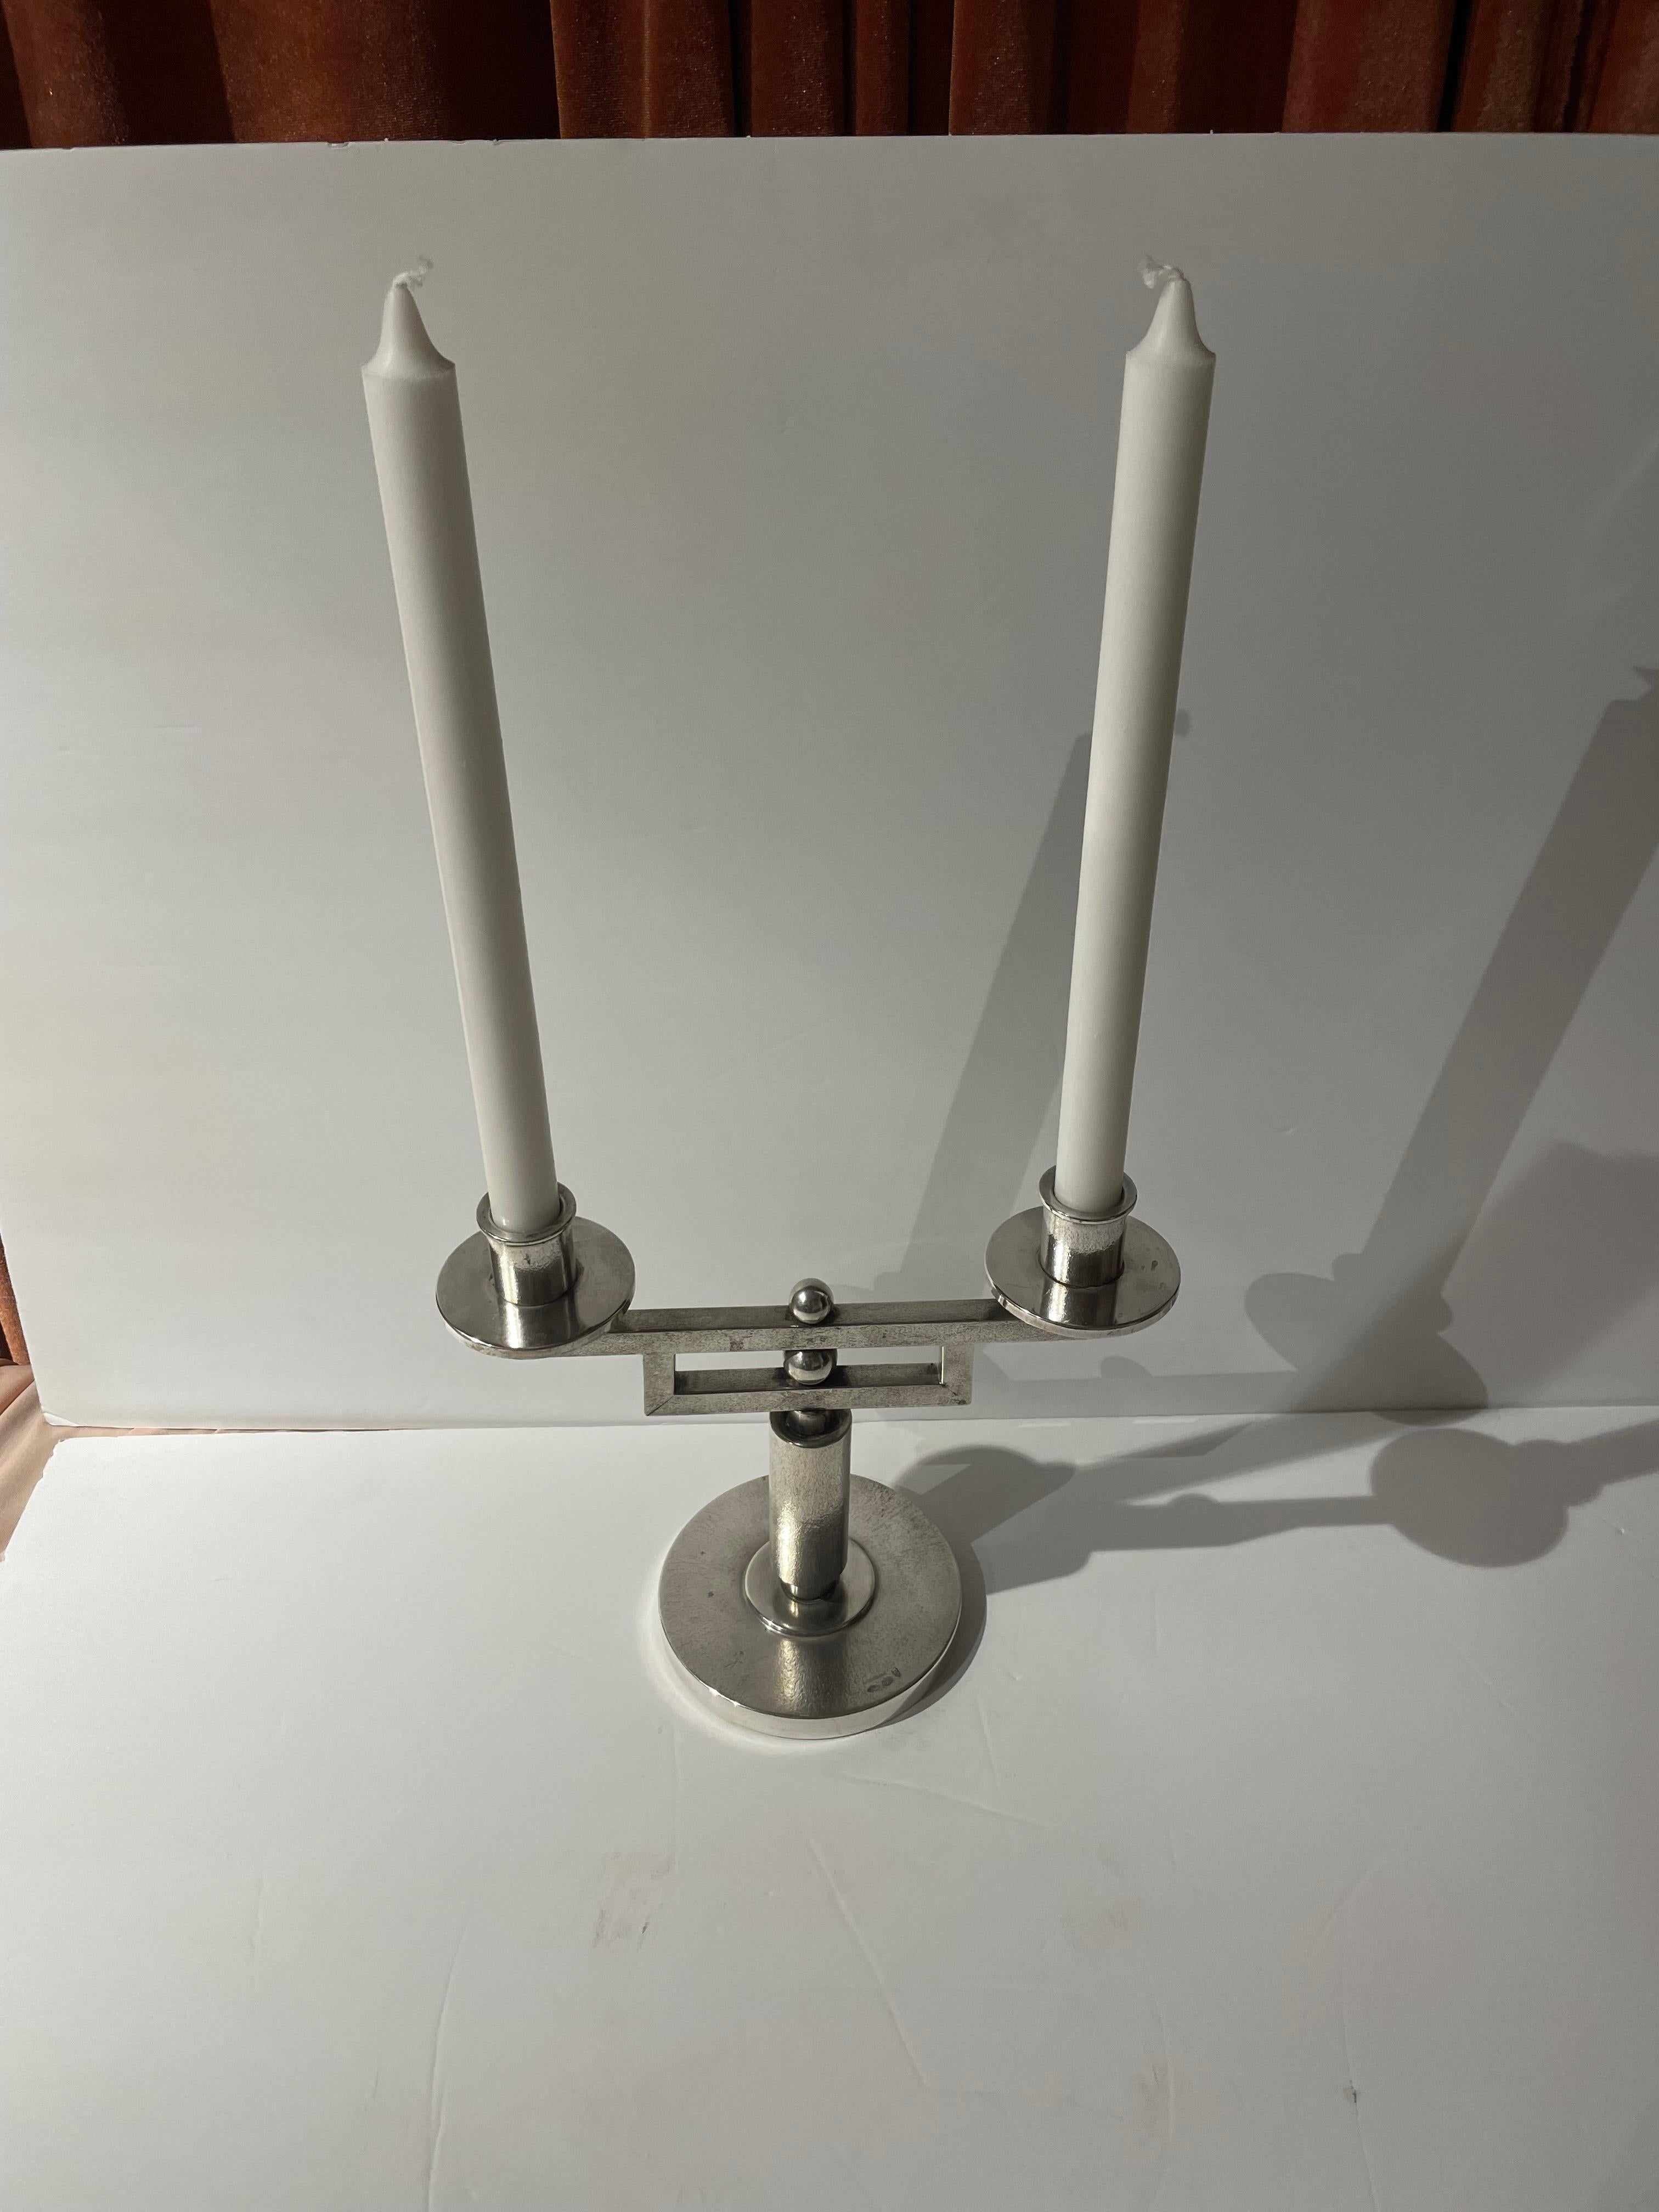 Sterling Silver Art Deco Italian Candlestick made by Romeo Miracoli. Modernist design, very high-quality details circa 1920-1940. The design treatment is unique, with a textured finish on some parts which complements the smooth finish on other